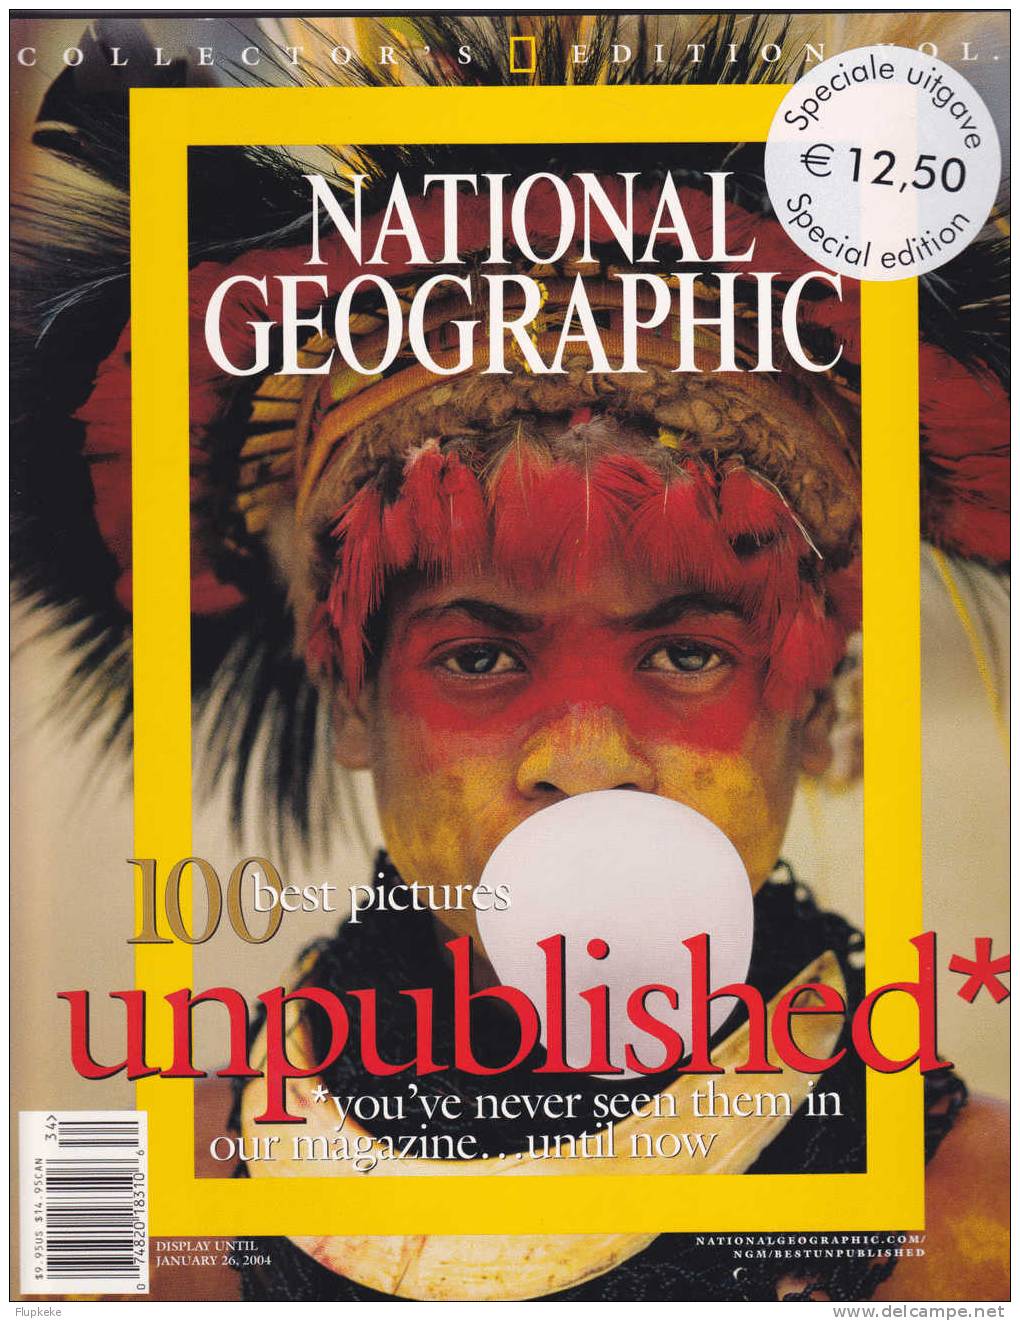 National Geographic Collector´s Edition Vol. 6 January 2004 - Travel/ Exploration